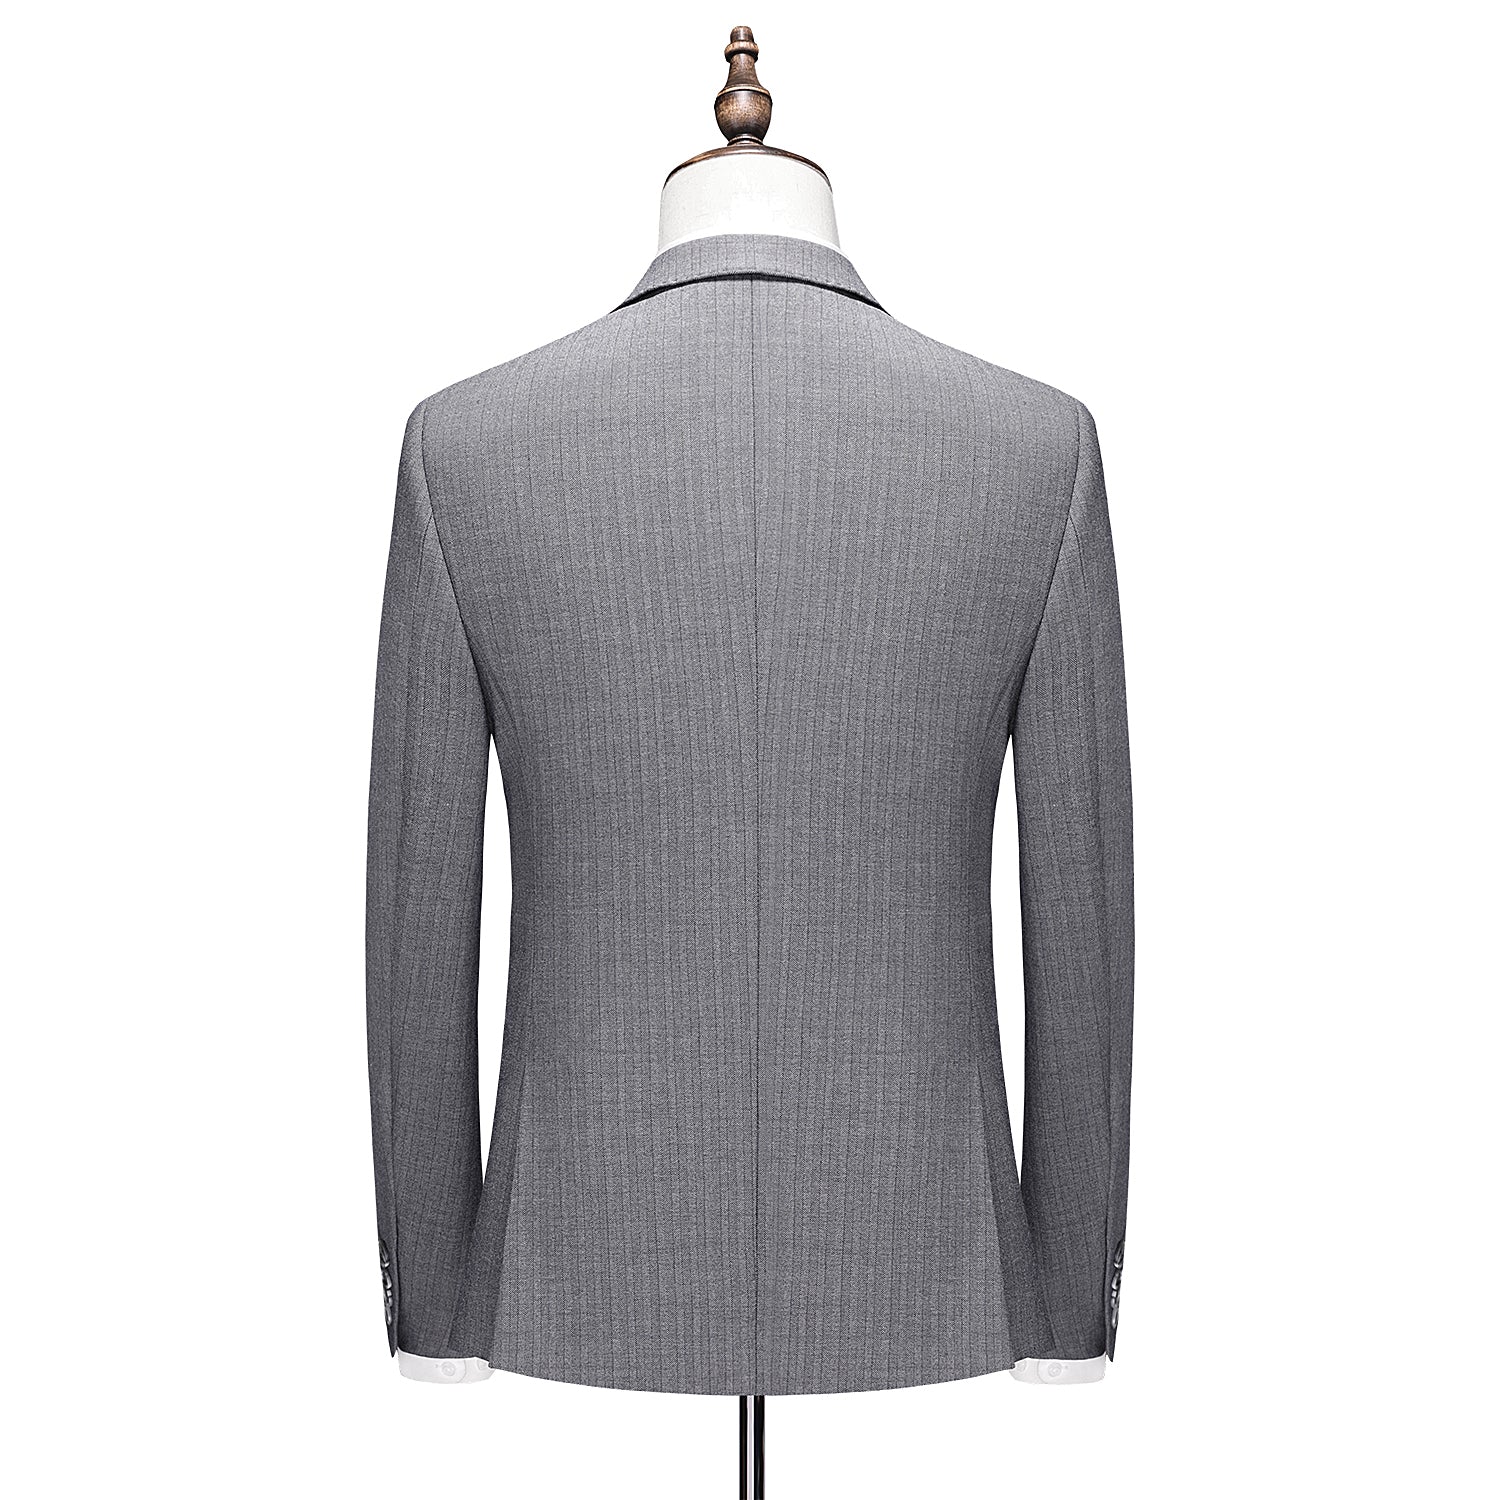 Men's Striped Blazer Coat in Solid Grey Two Buttons